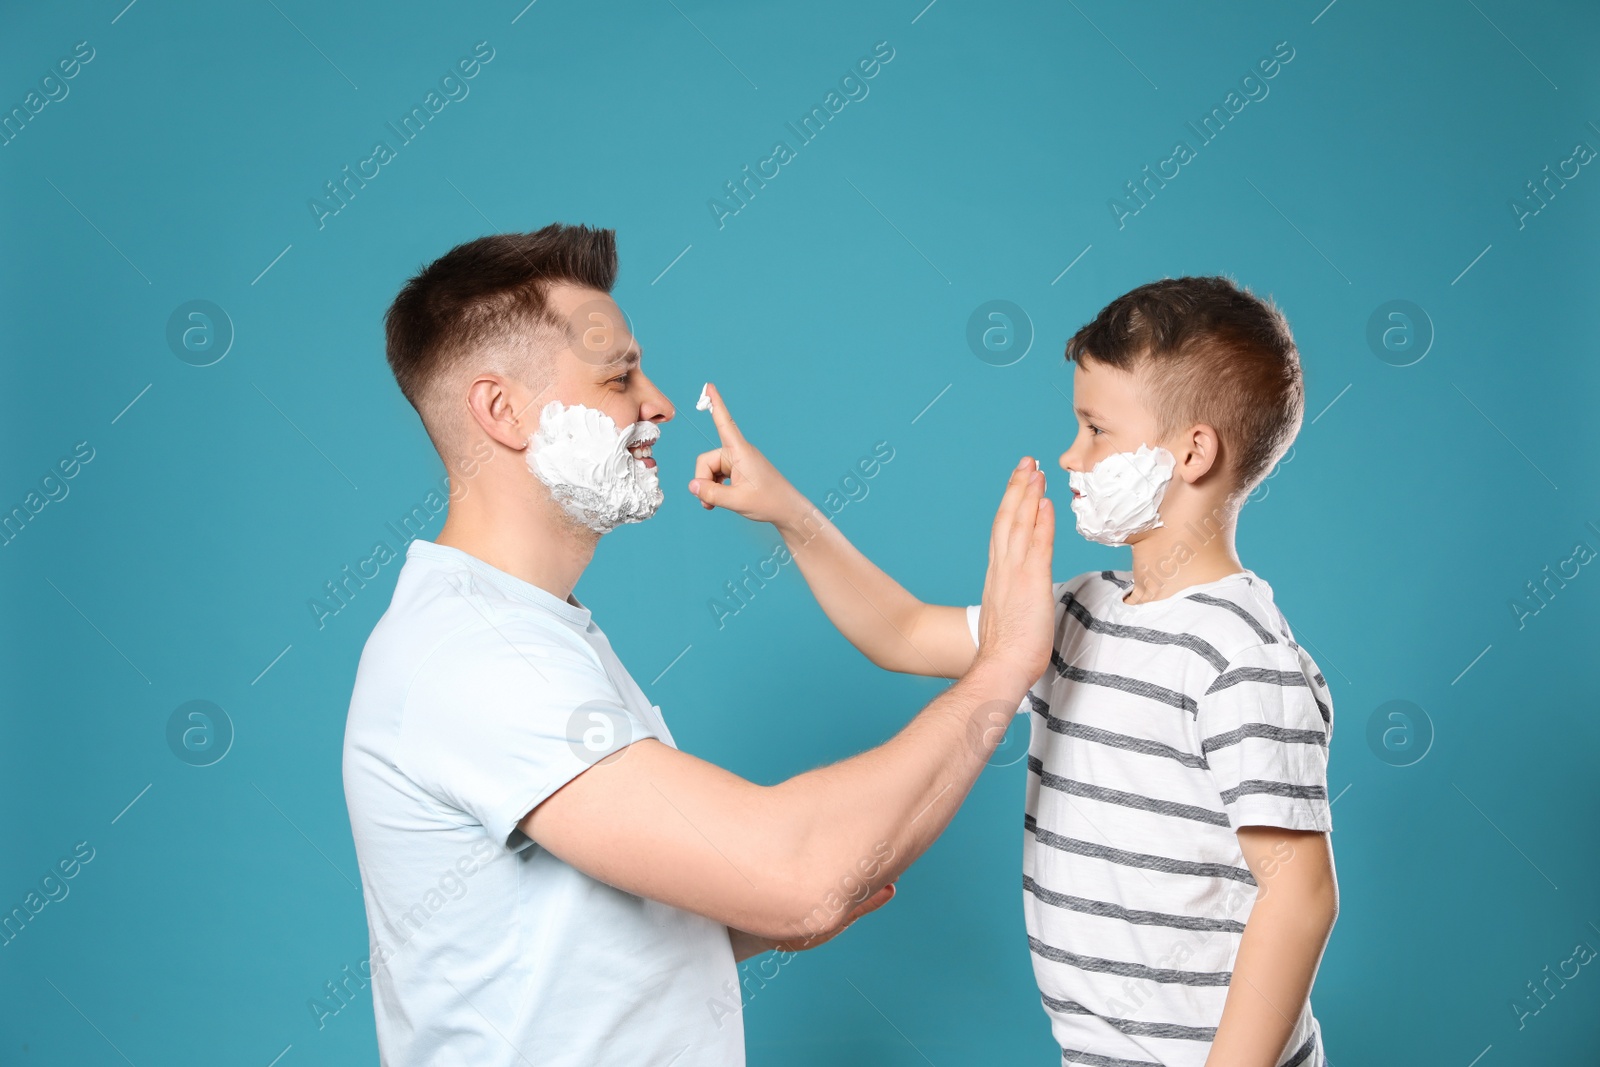 Photo of Happy dad and son with shaving foam on faces against blue background